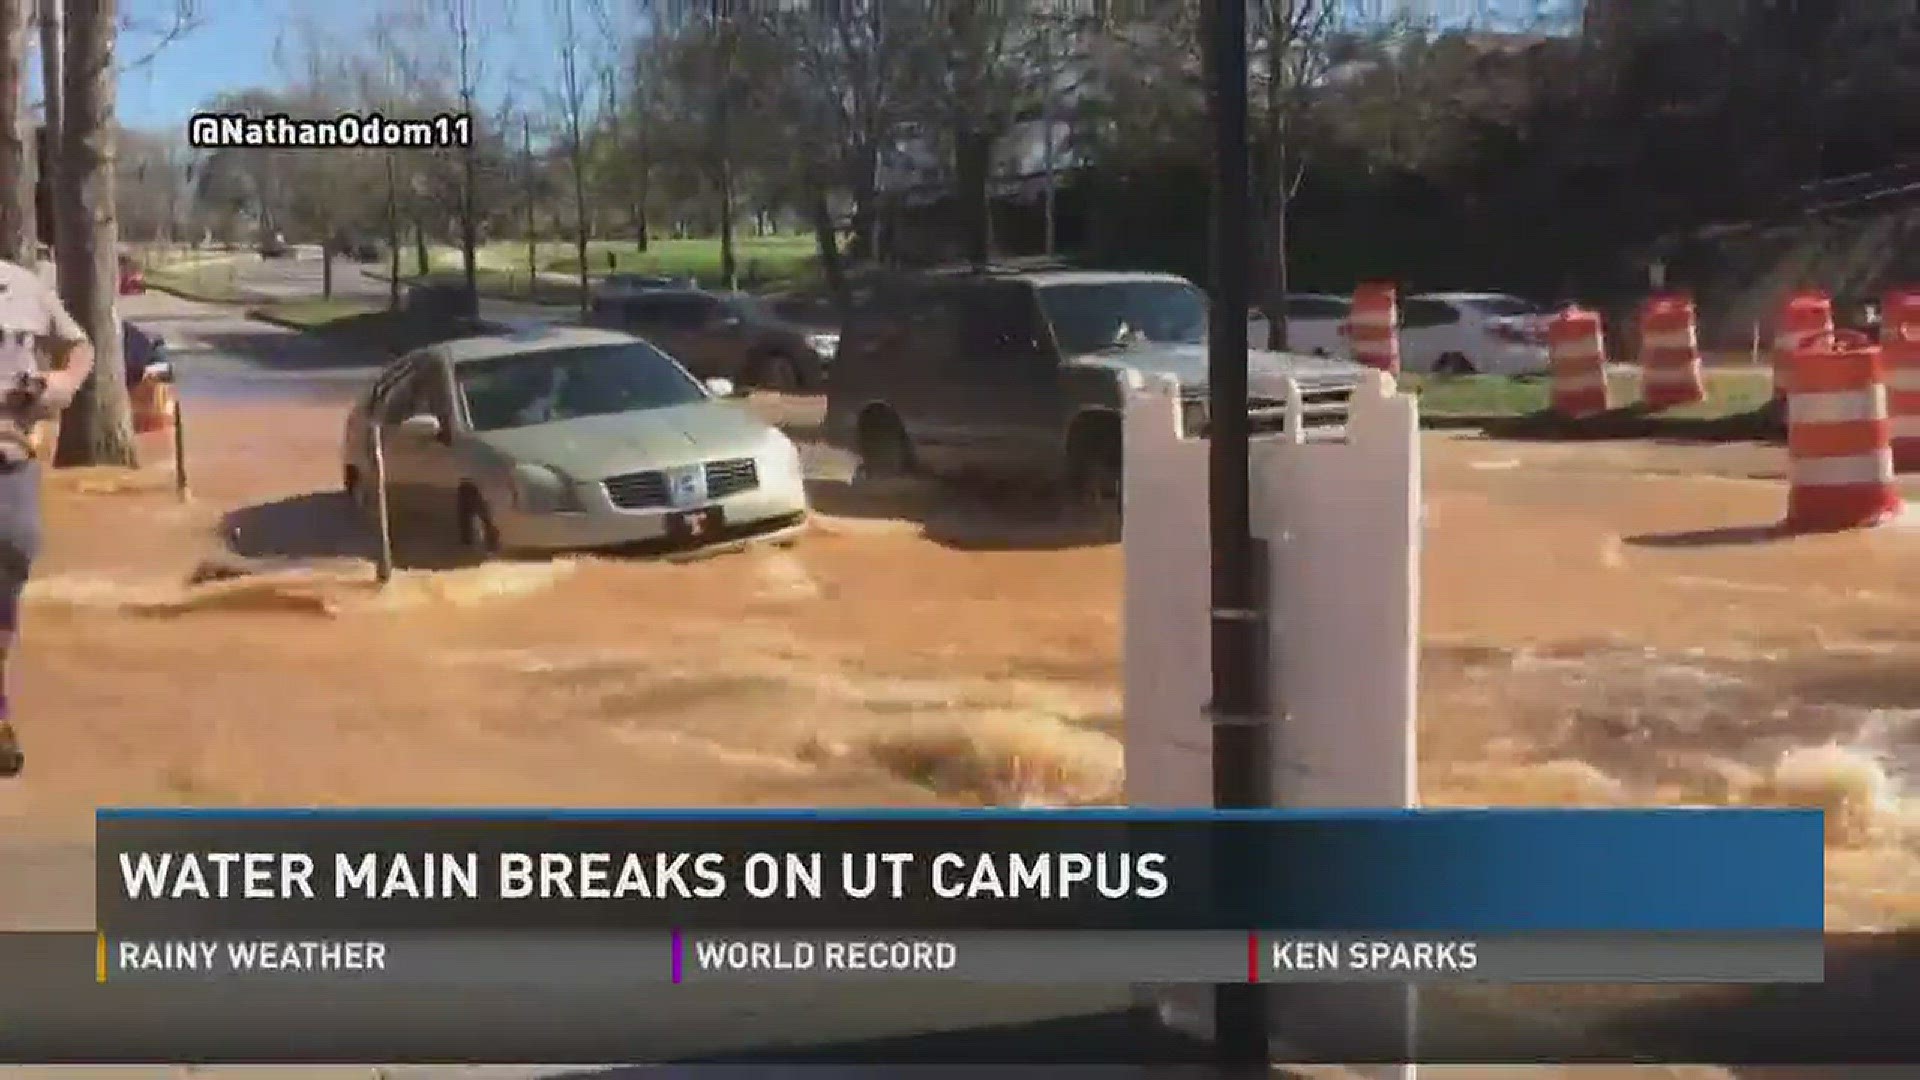 March 29, 2017: A 12-inch water main broke outside Hodges Library on the UT campus.